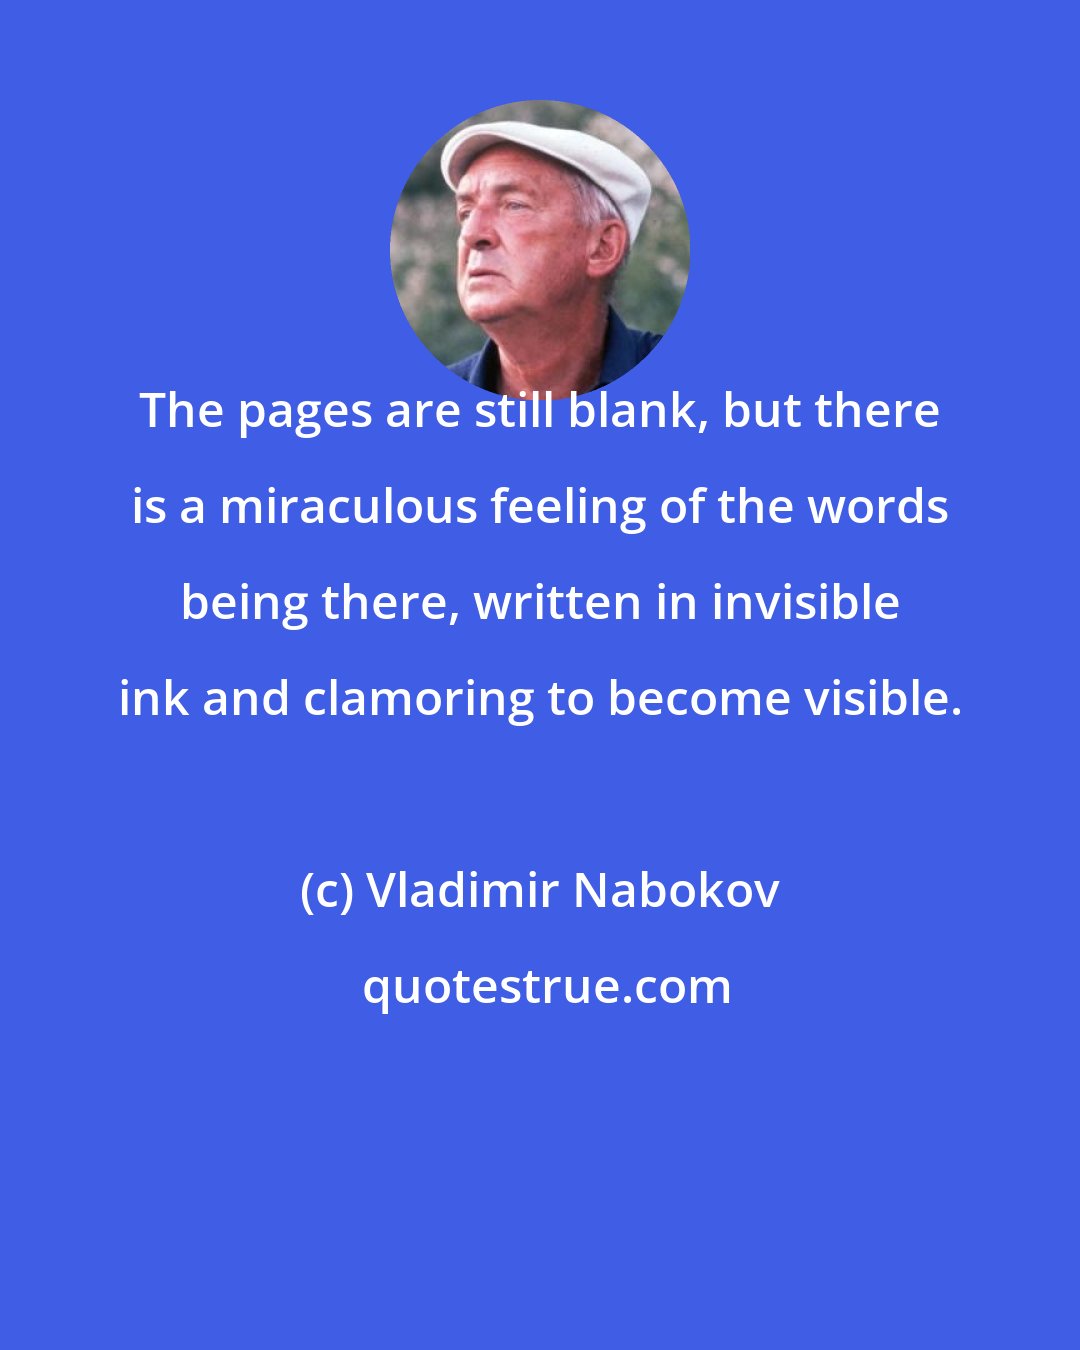 Vladimir Nabokov: The pages are still blank, but there is a miraculous feeling of the words being there, written in invisible ink and clamoring to become visible.